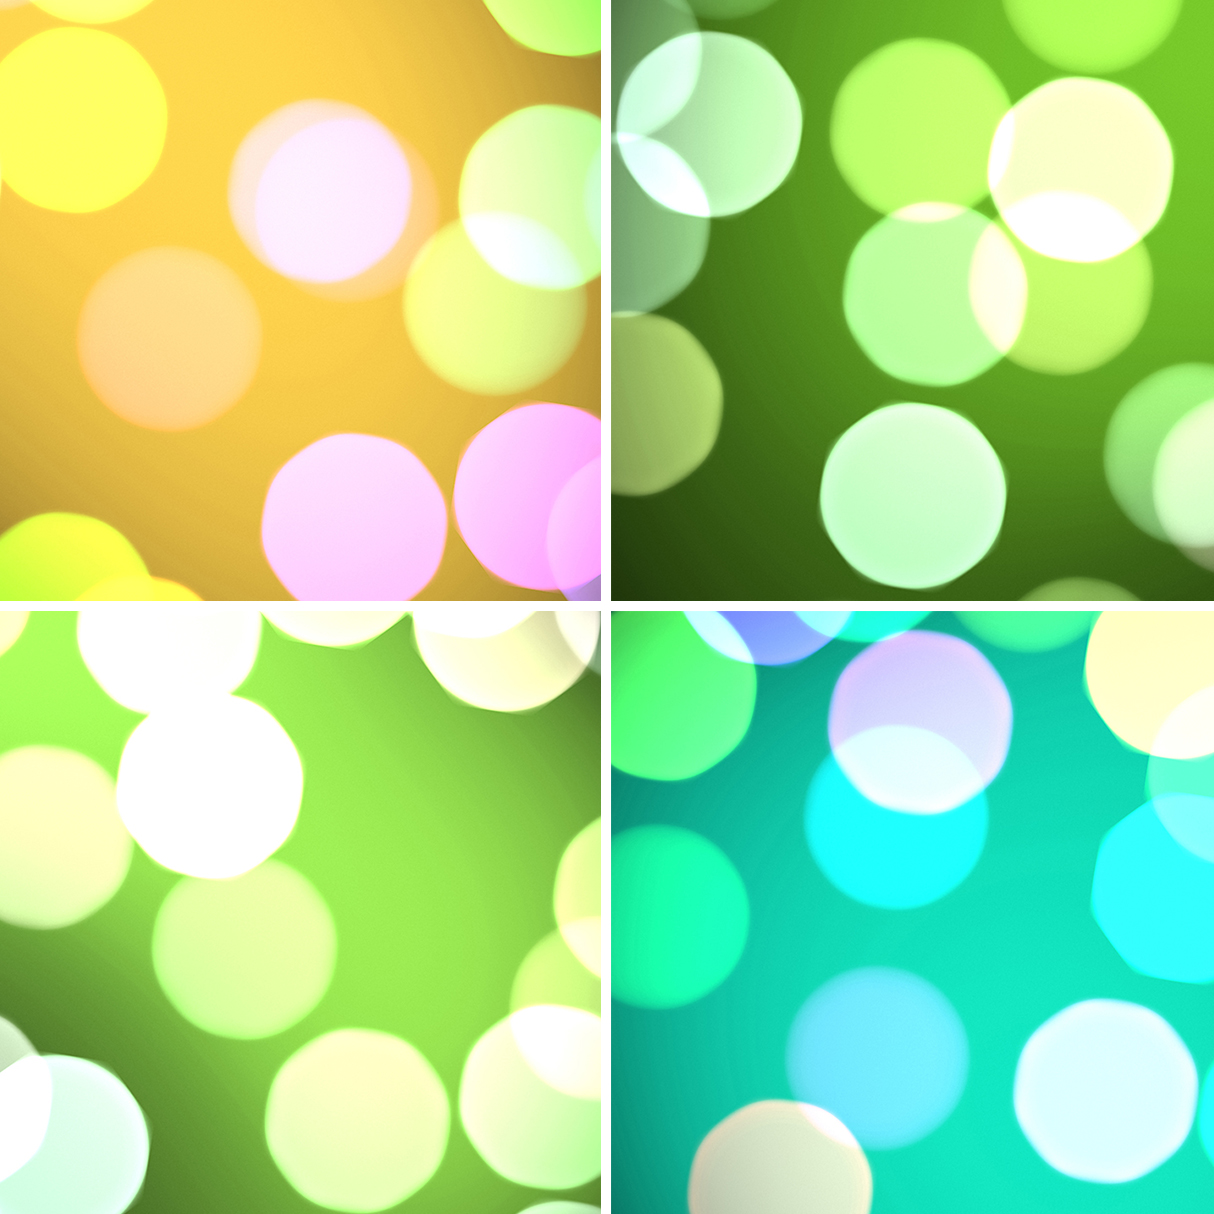 50 Bokeh Pro Backgrounds Samples Preview – Part 6